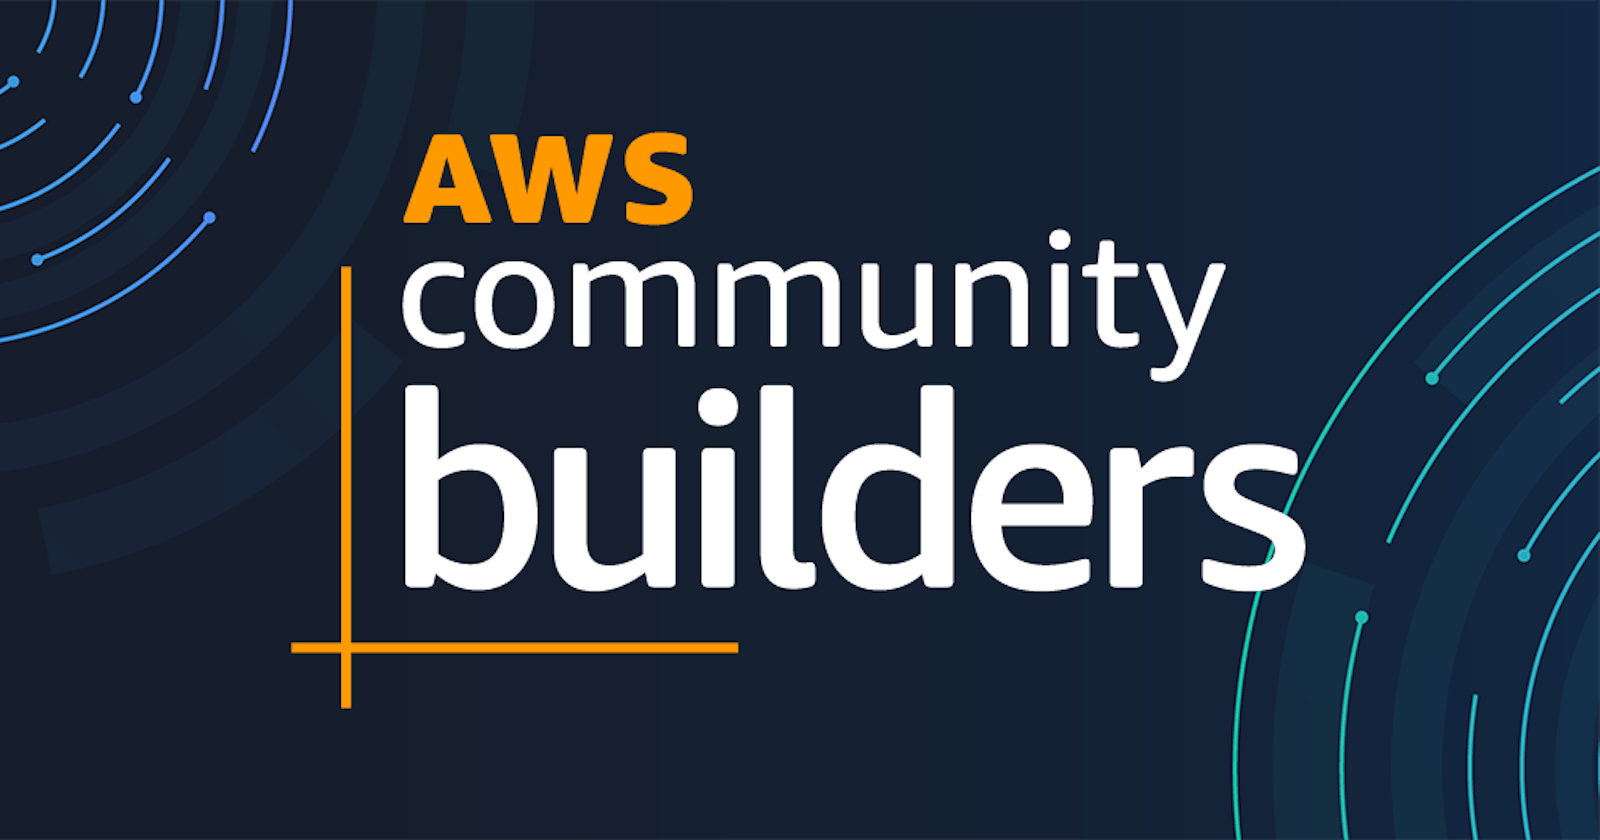 The AWS Community Builders Program - What it is and how to apply.